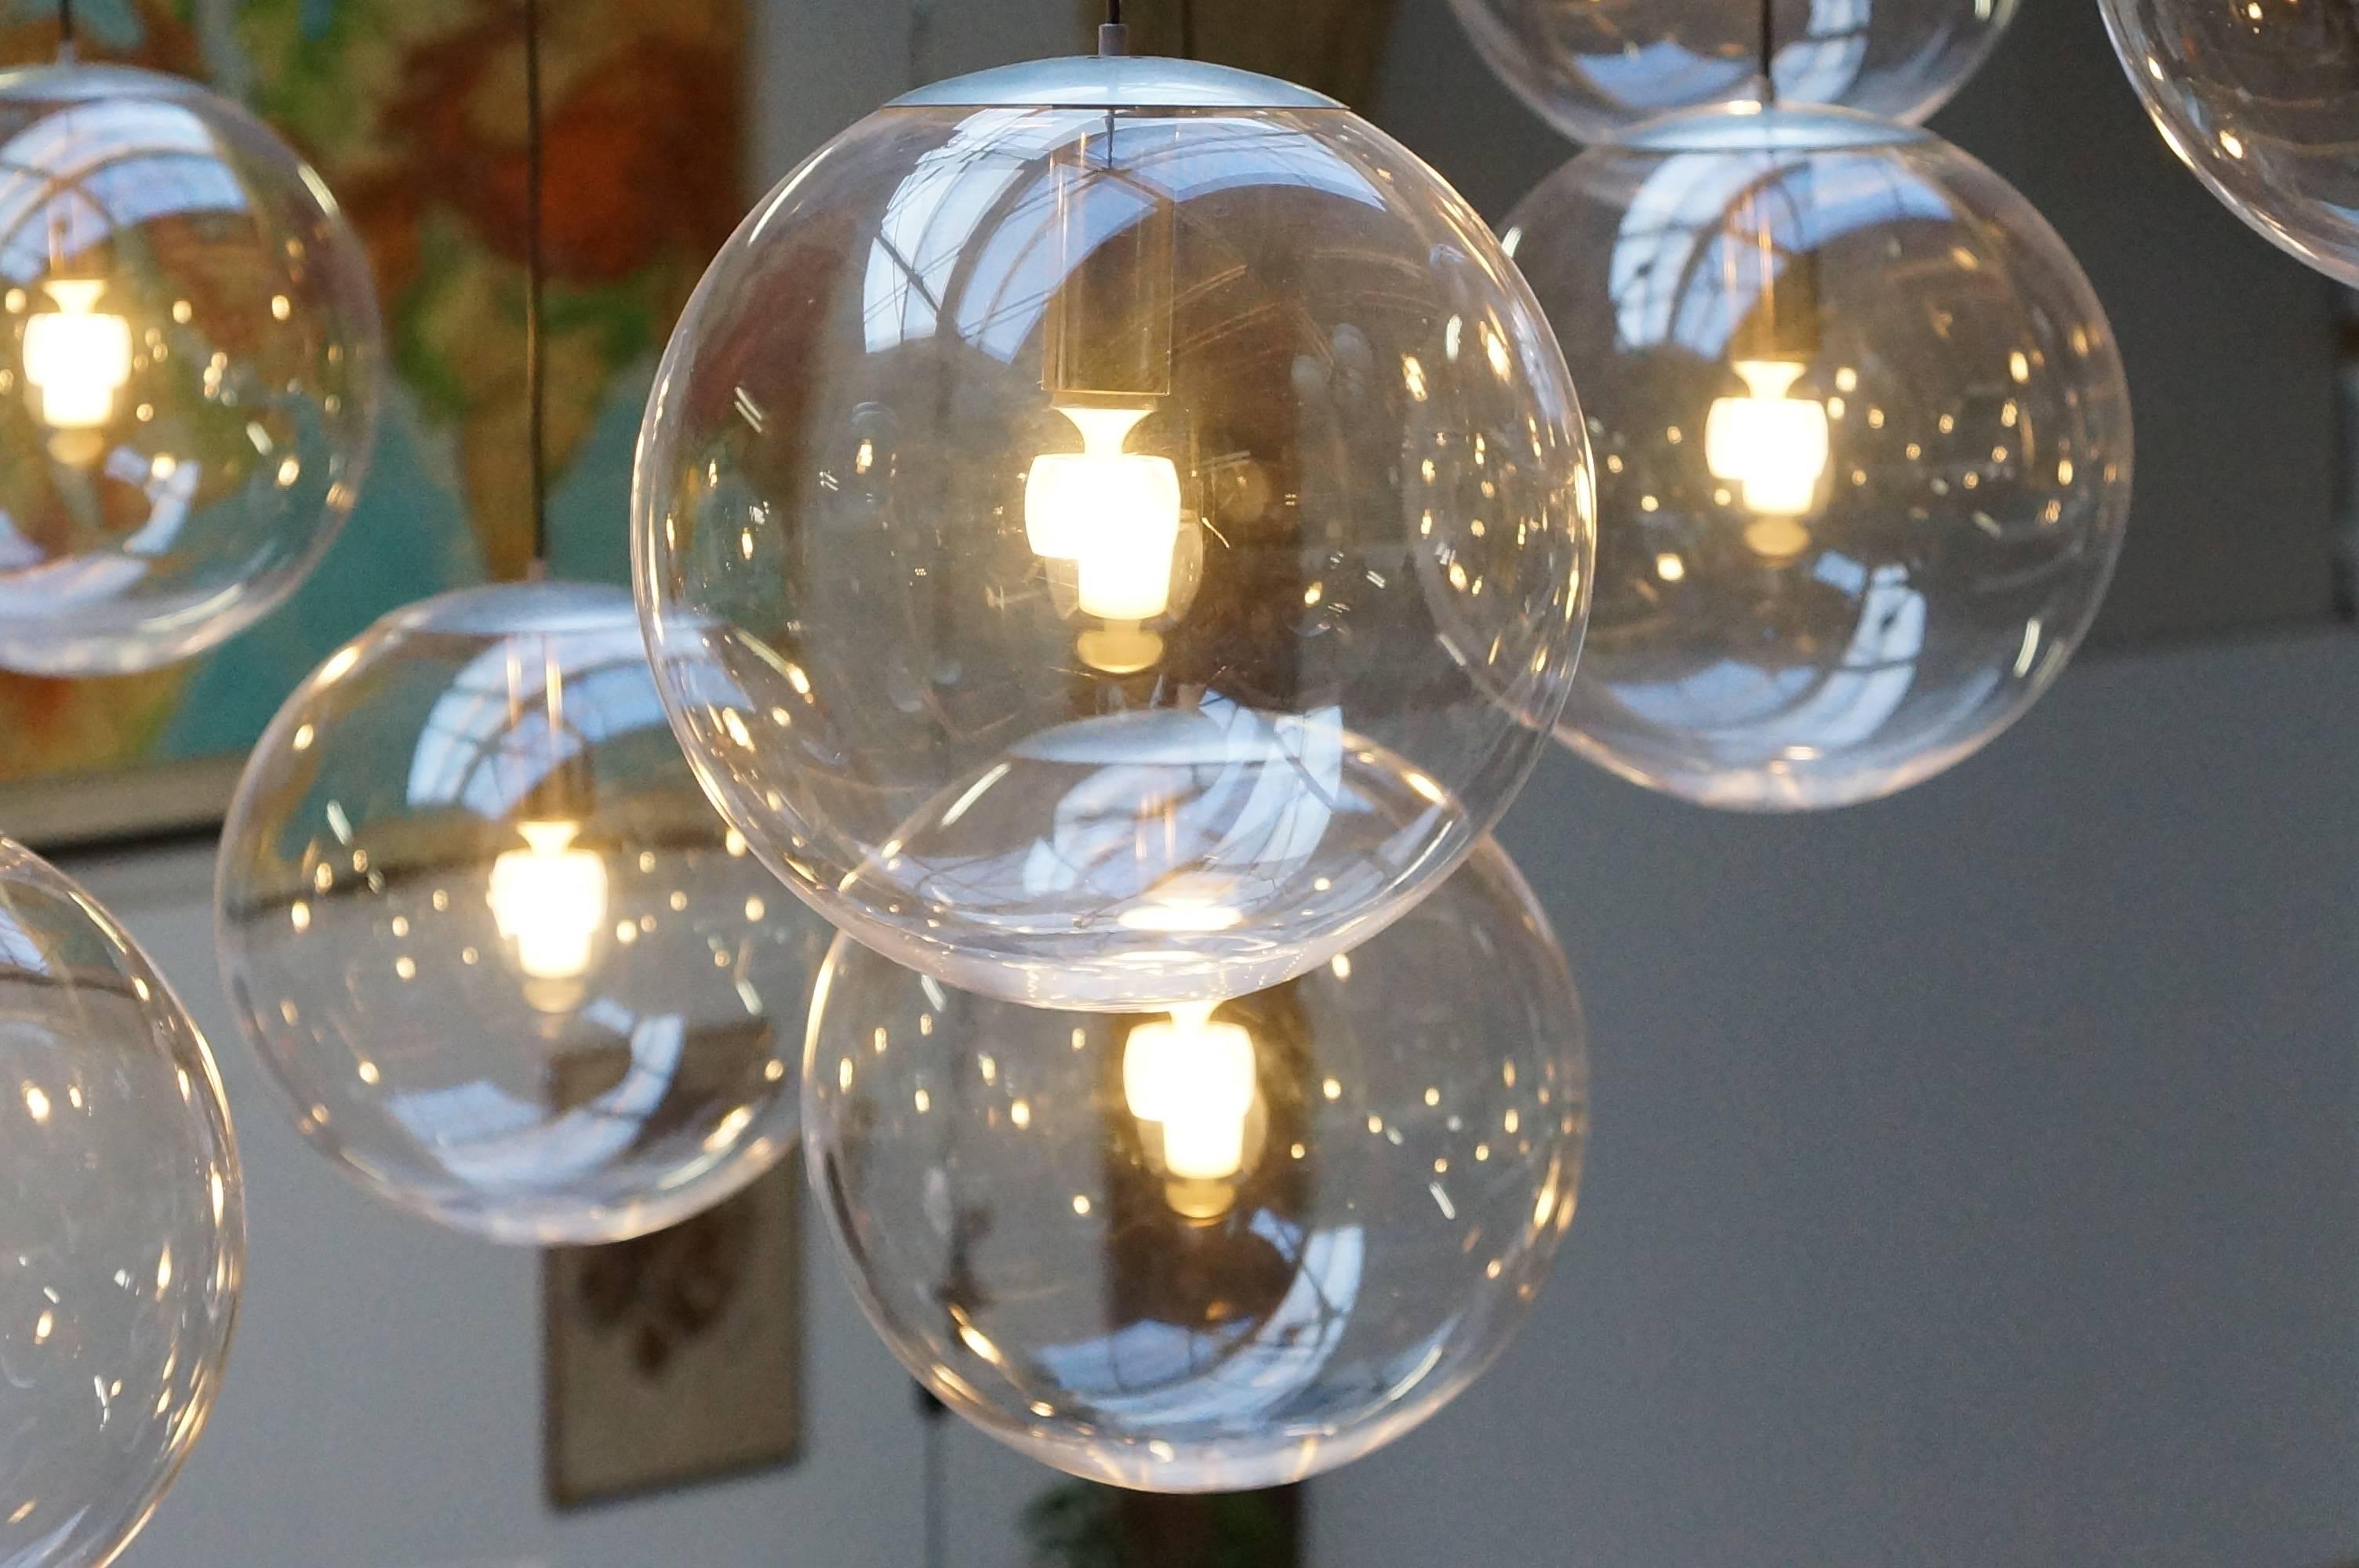 20th Century 1970s Large Chandelier by Frank Ligtelijn for Raak Amsterdam with 14 Light Balls